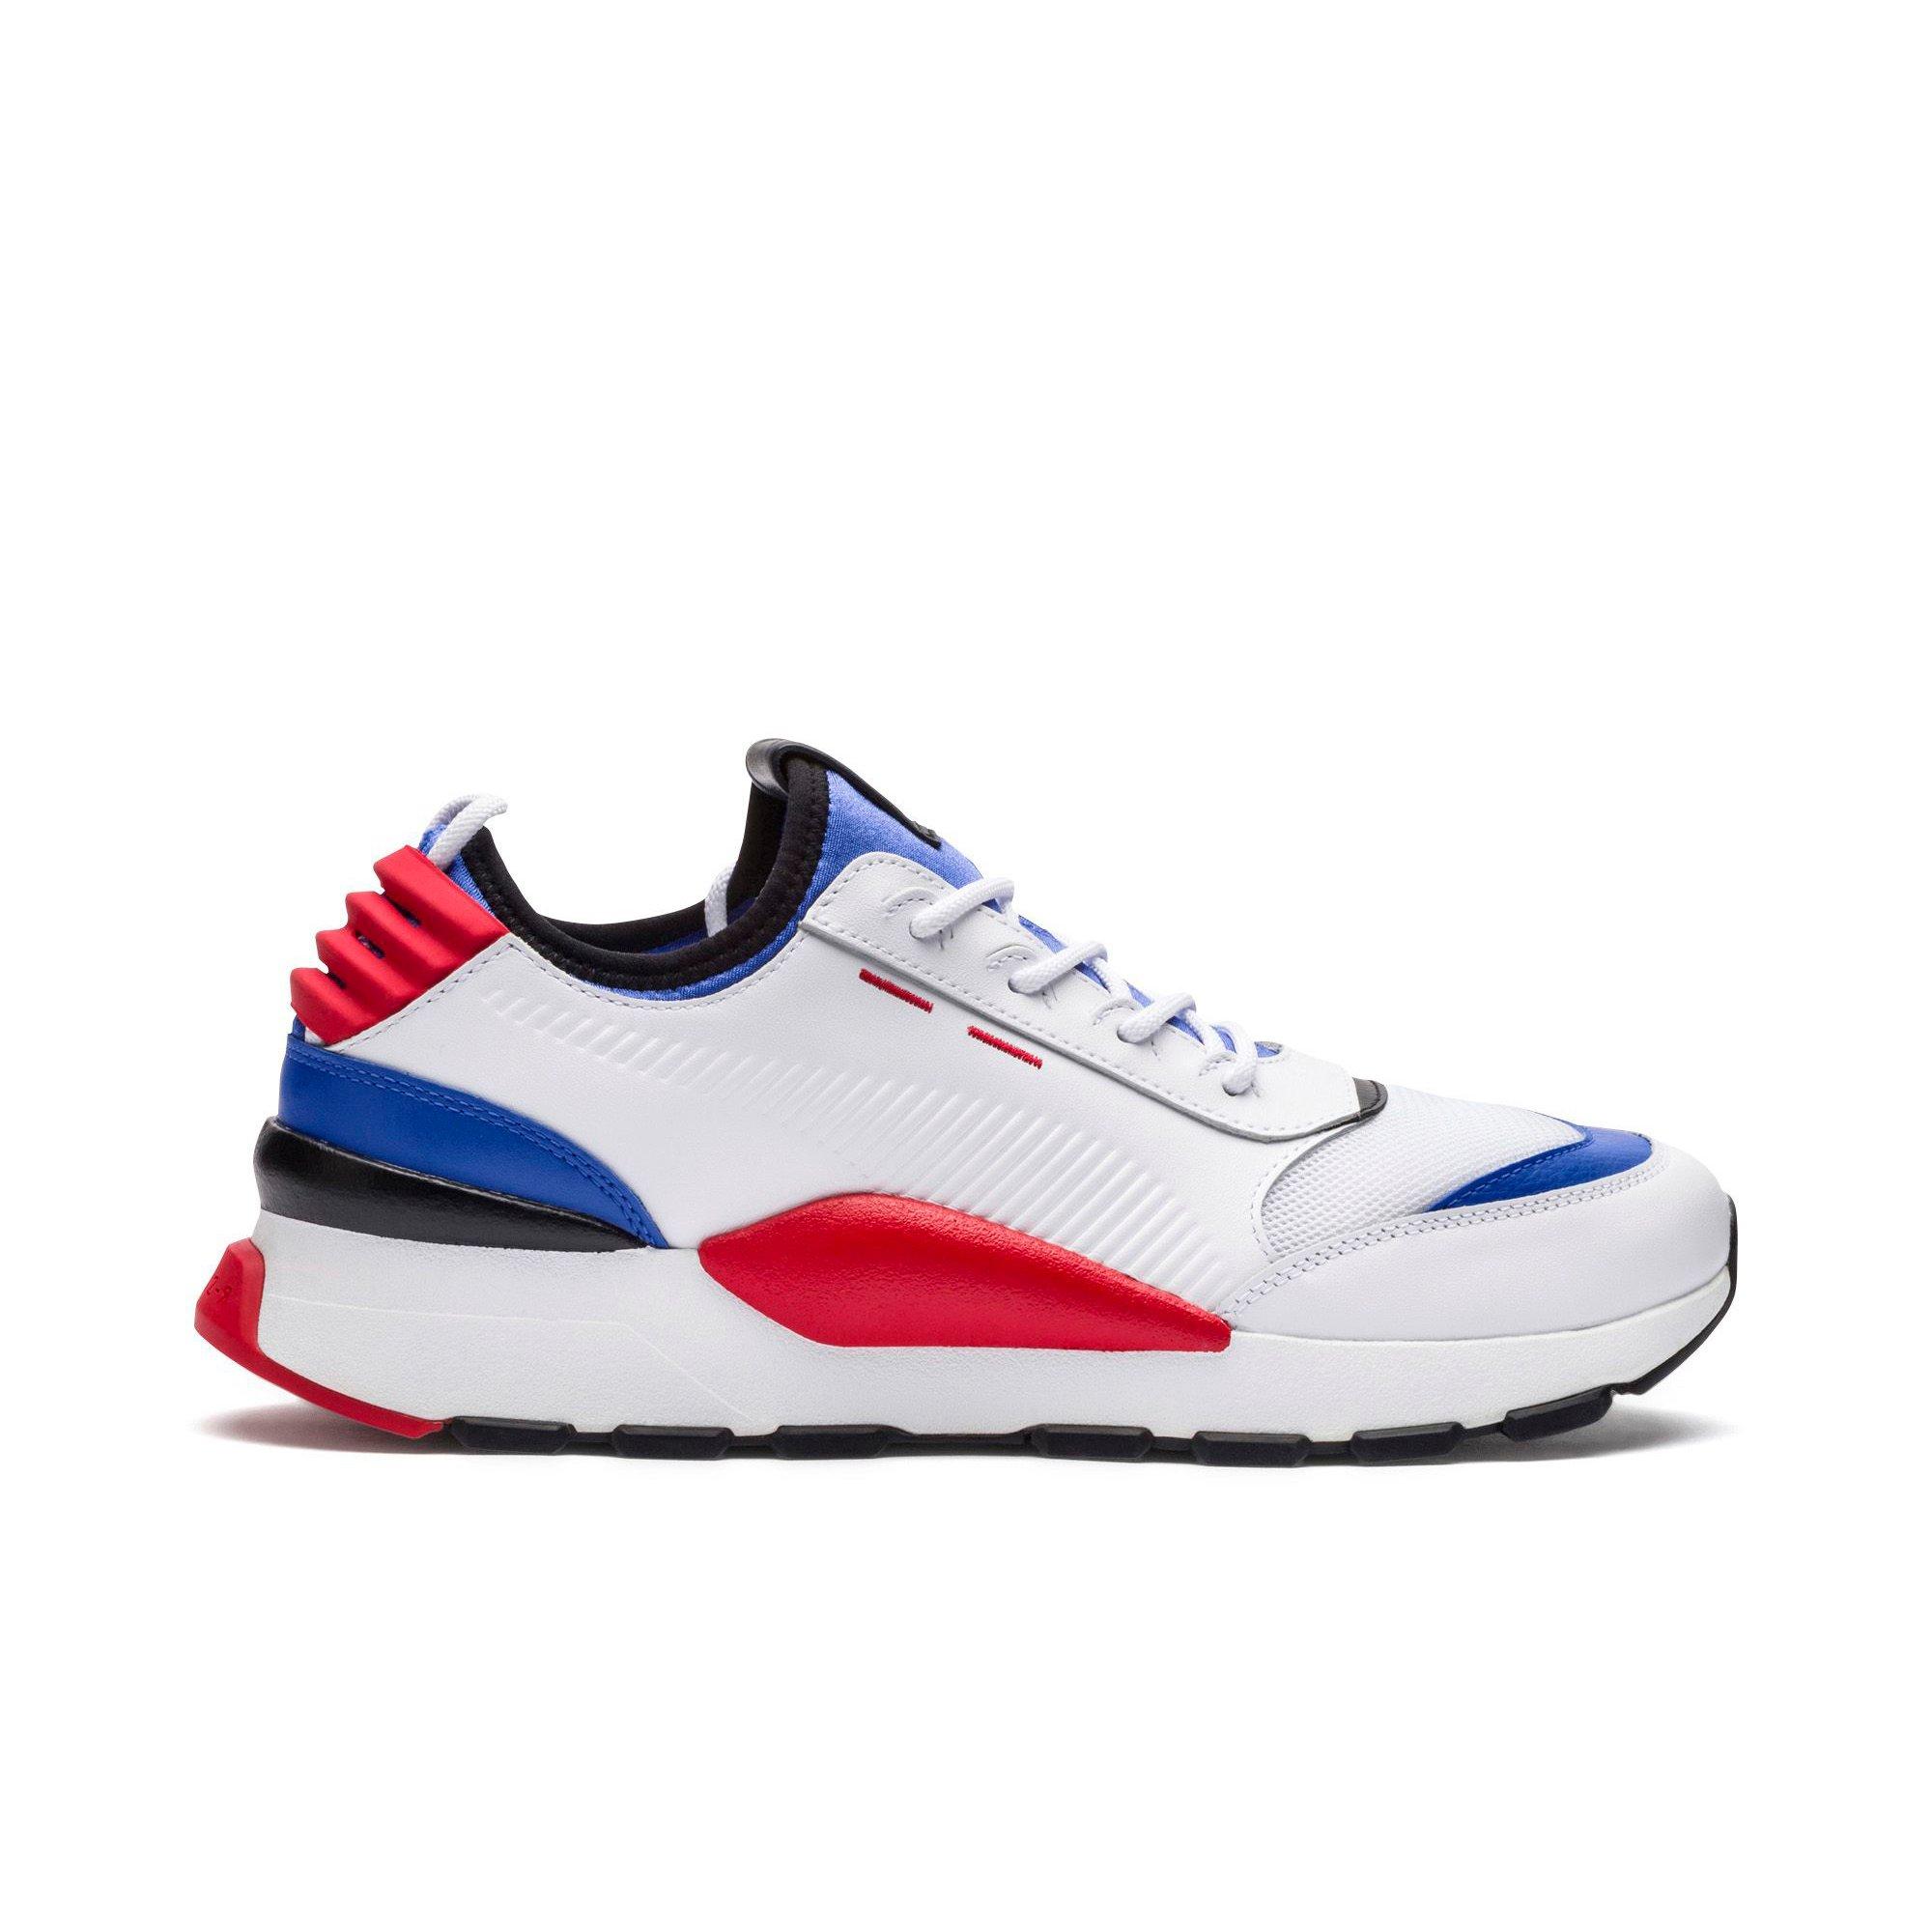 red white and blue puma shoes